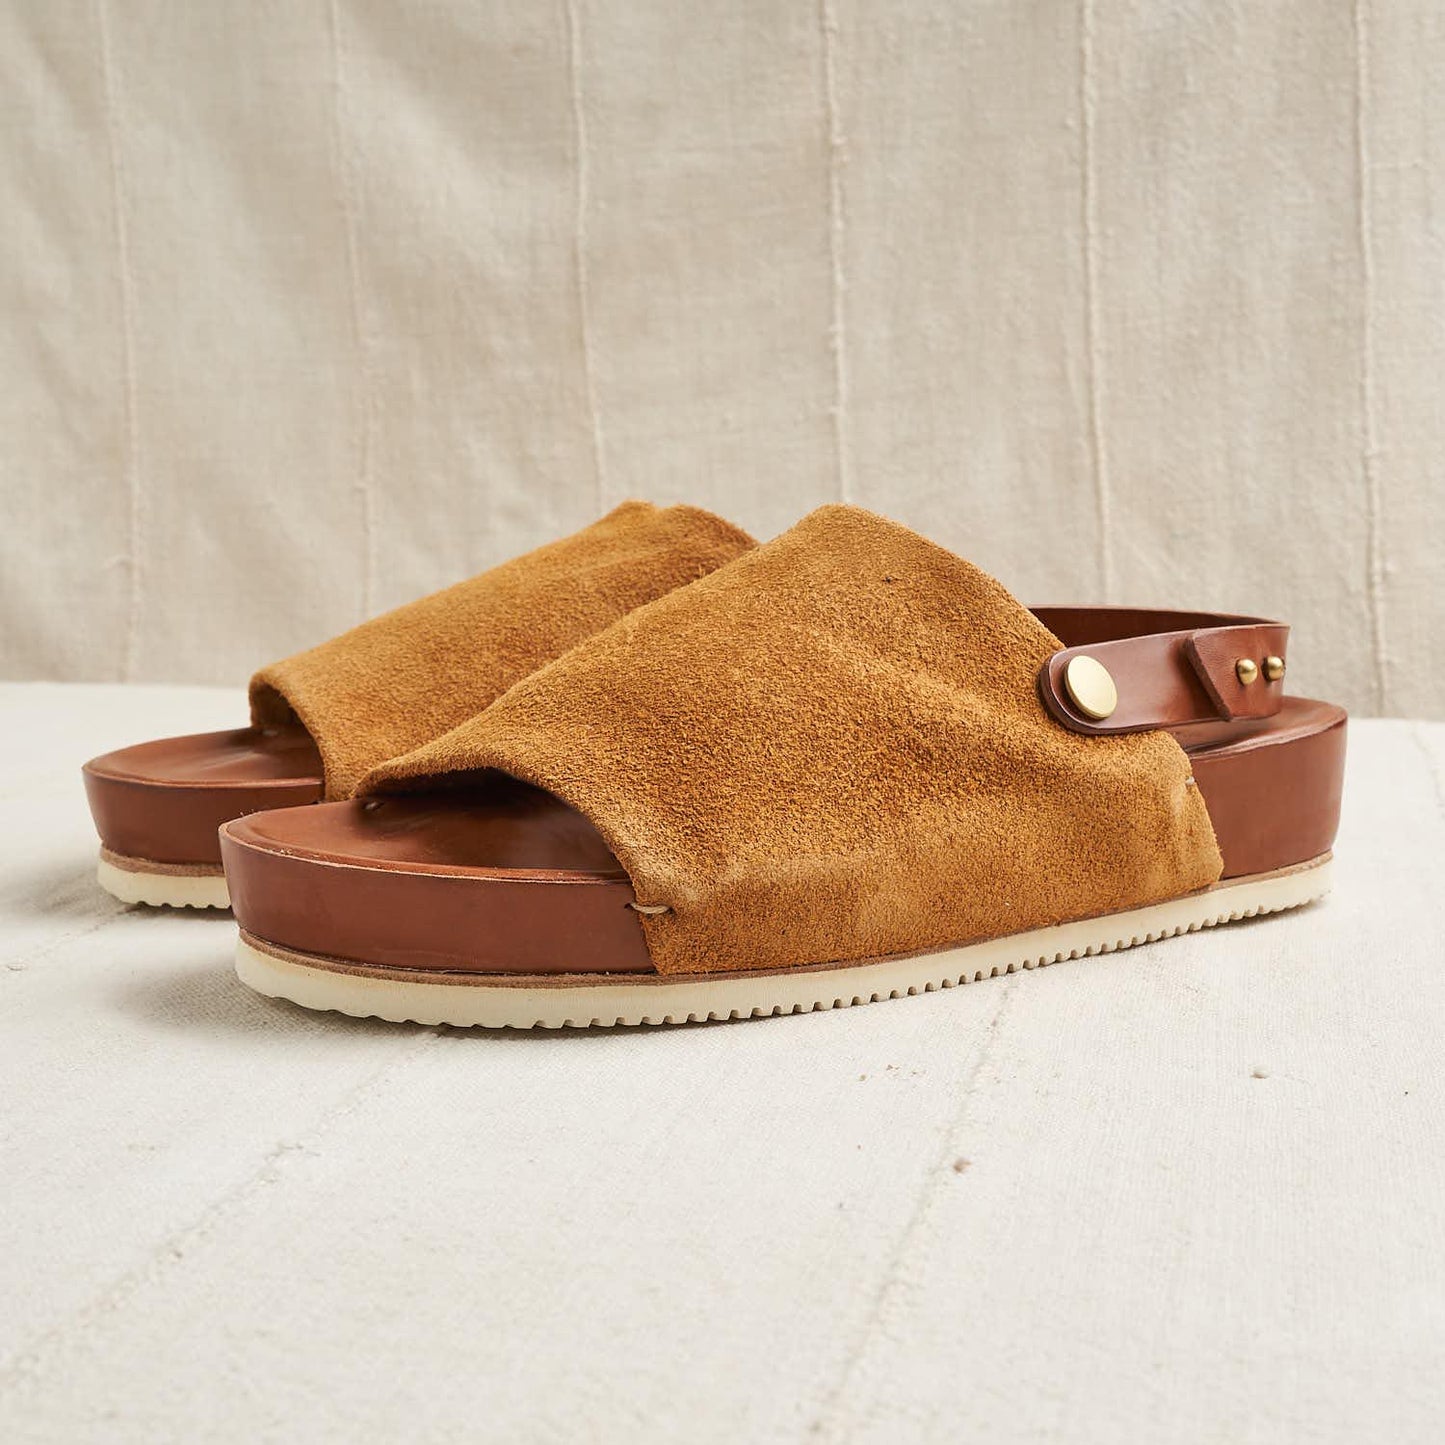 One Strap Sandal, Vegetable Tanned Suede